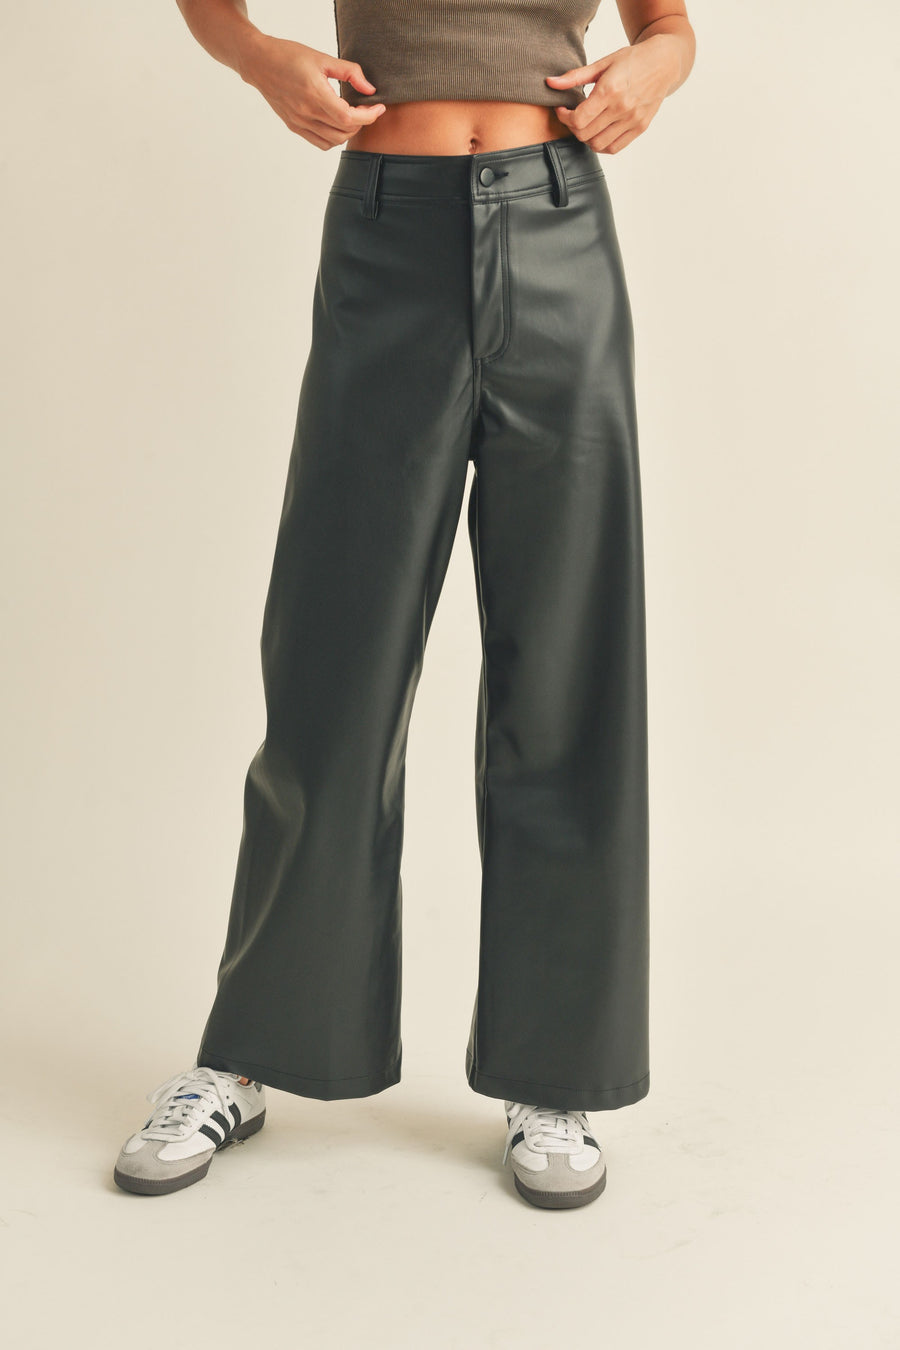 Black PU leather pants with cropped edges. 